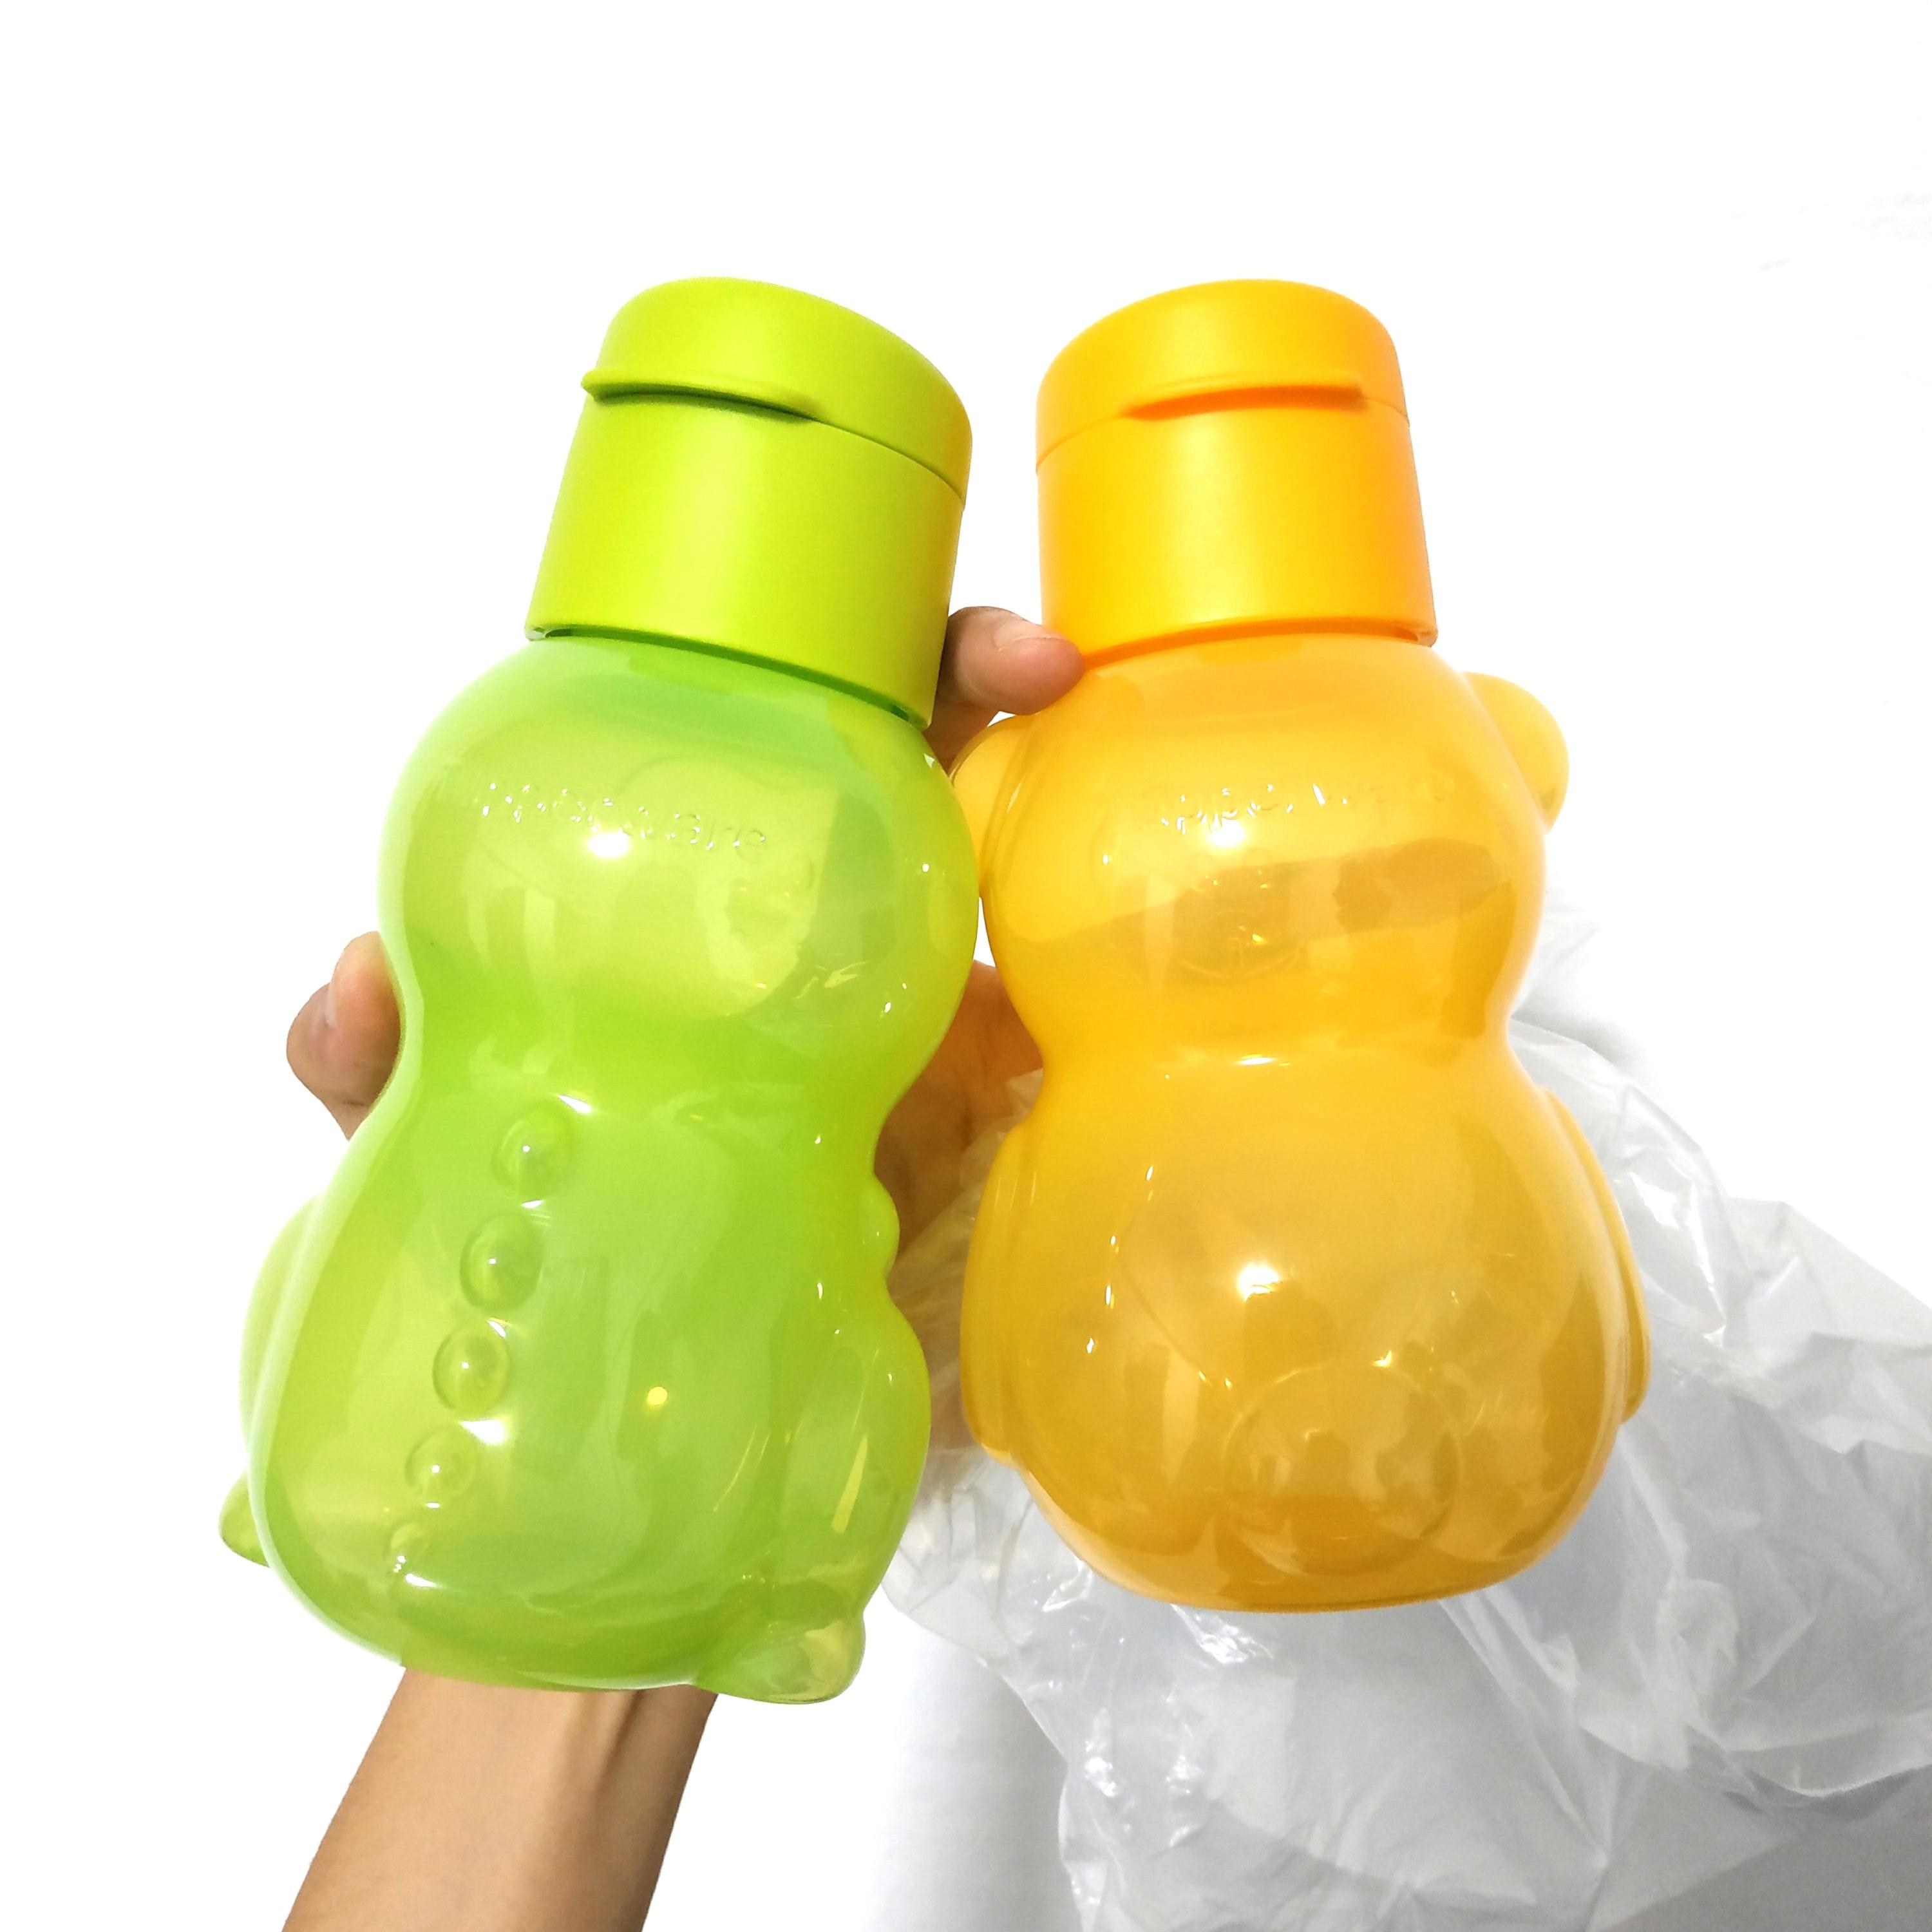 Kids Collection from Tupperware Eco Bottle Lion 350ml 🦁 Eco